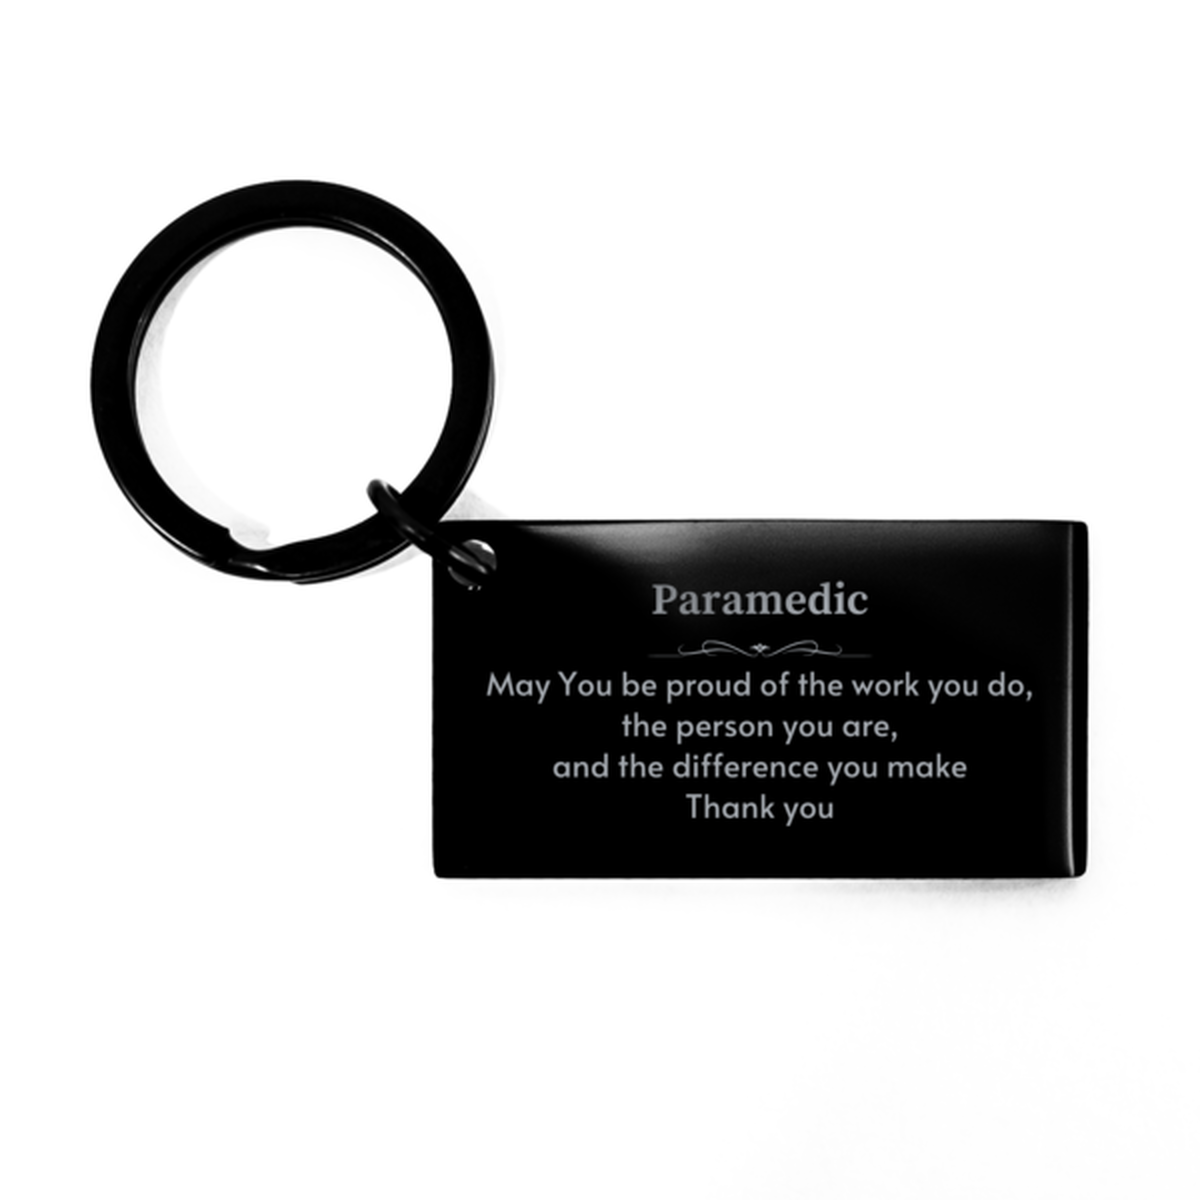 Heartwarming Keychain Retirement Coworkers Gifts for Paramedic, Prosthodontist May You be proud of the work you do, the person you are Gifts for Boss Men Women Friends